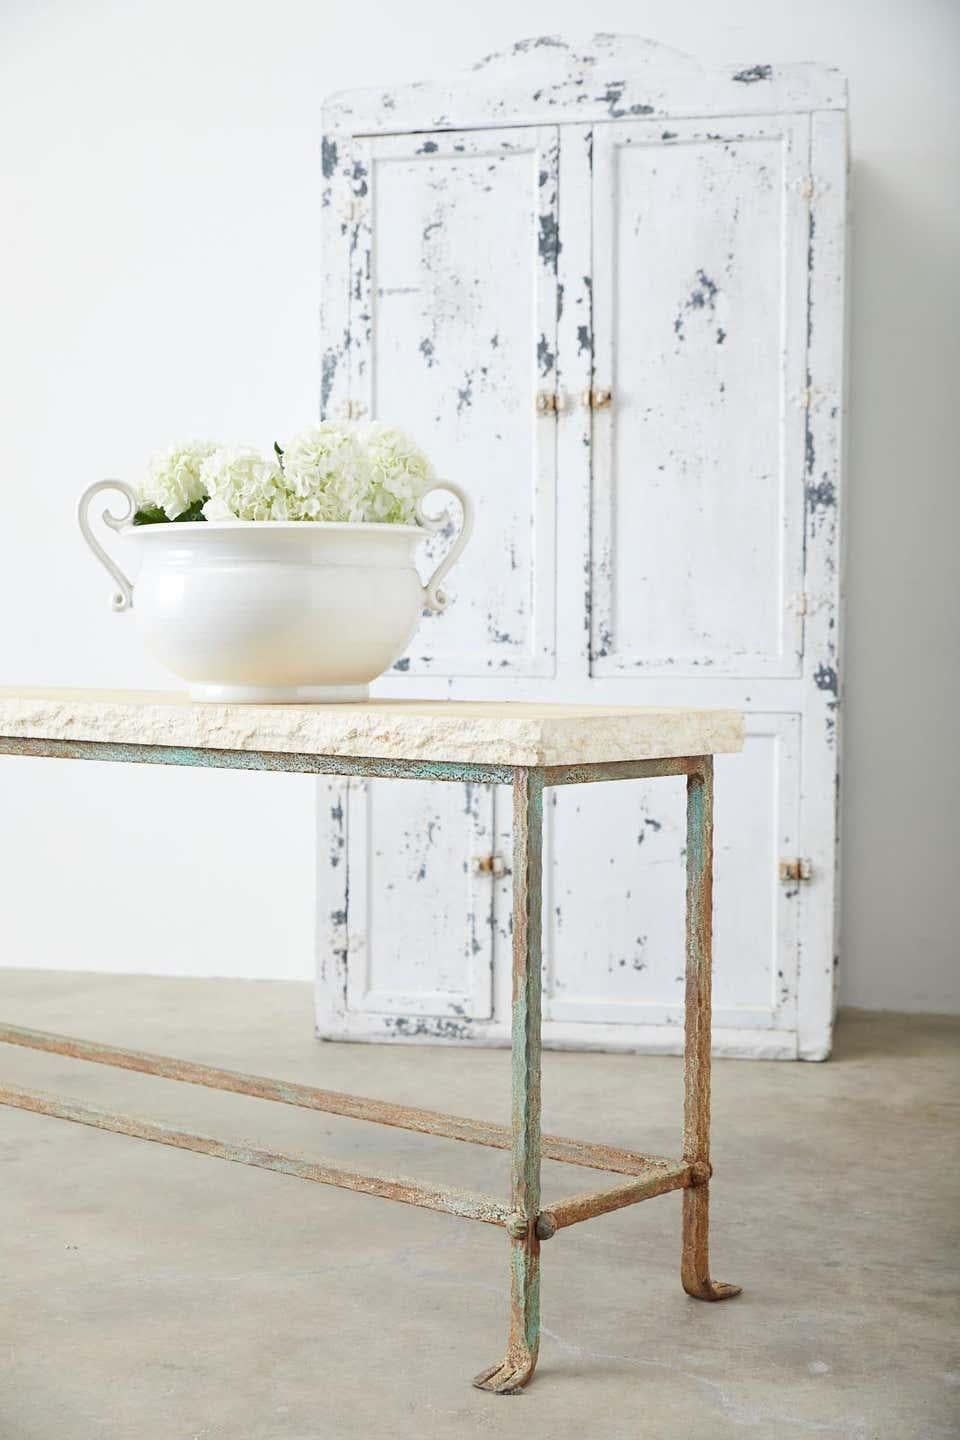 Amazing patio garden table or console table featuring a 2 inch thick stone top having a hand-chiseled live edge with a rough travertine style finish. The large iron base has a unique hand-hammered finish with small scalloped edges and ending with